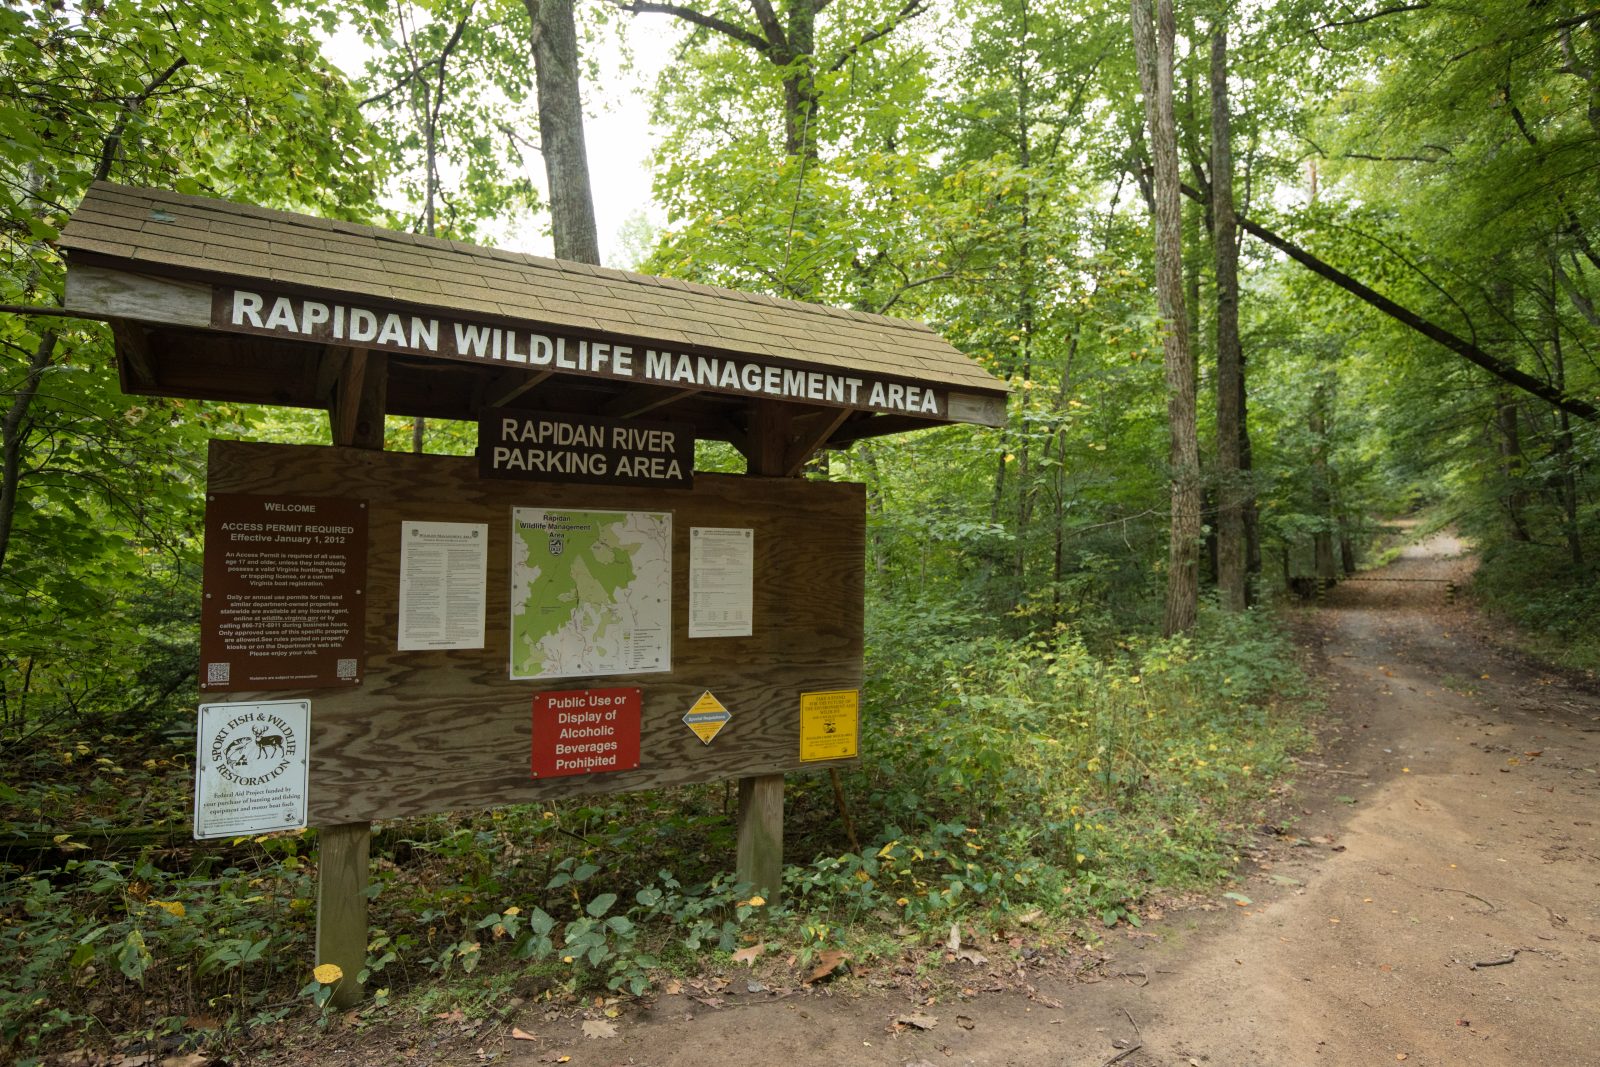 A kiosk at Rapidan Wildlife Management Area and a dirt path leading into the area